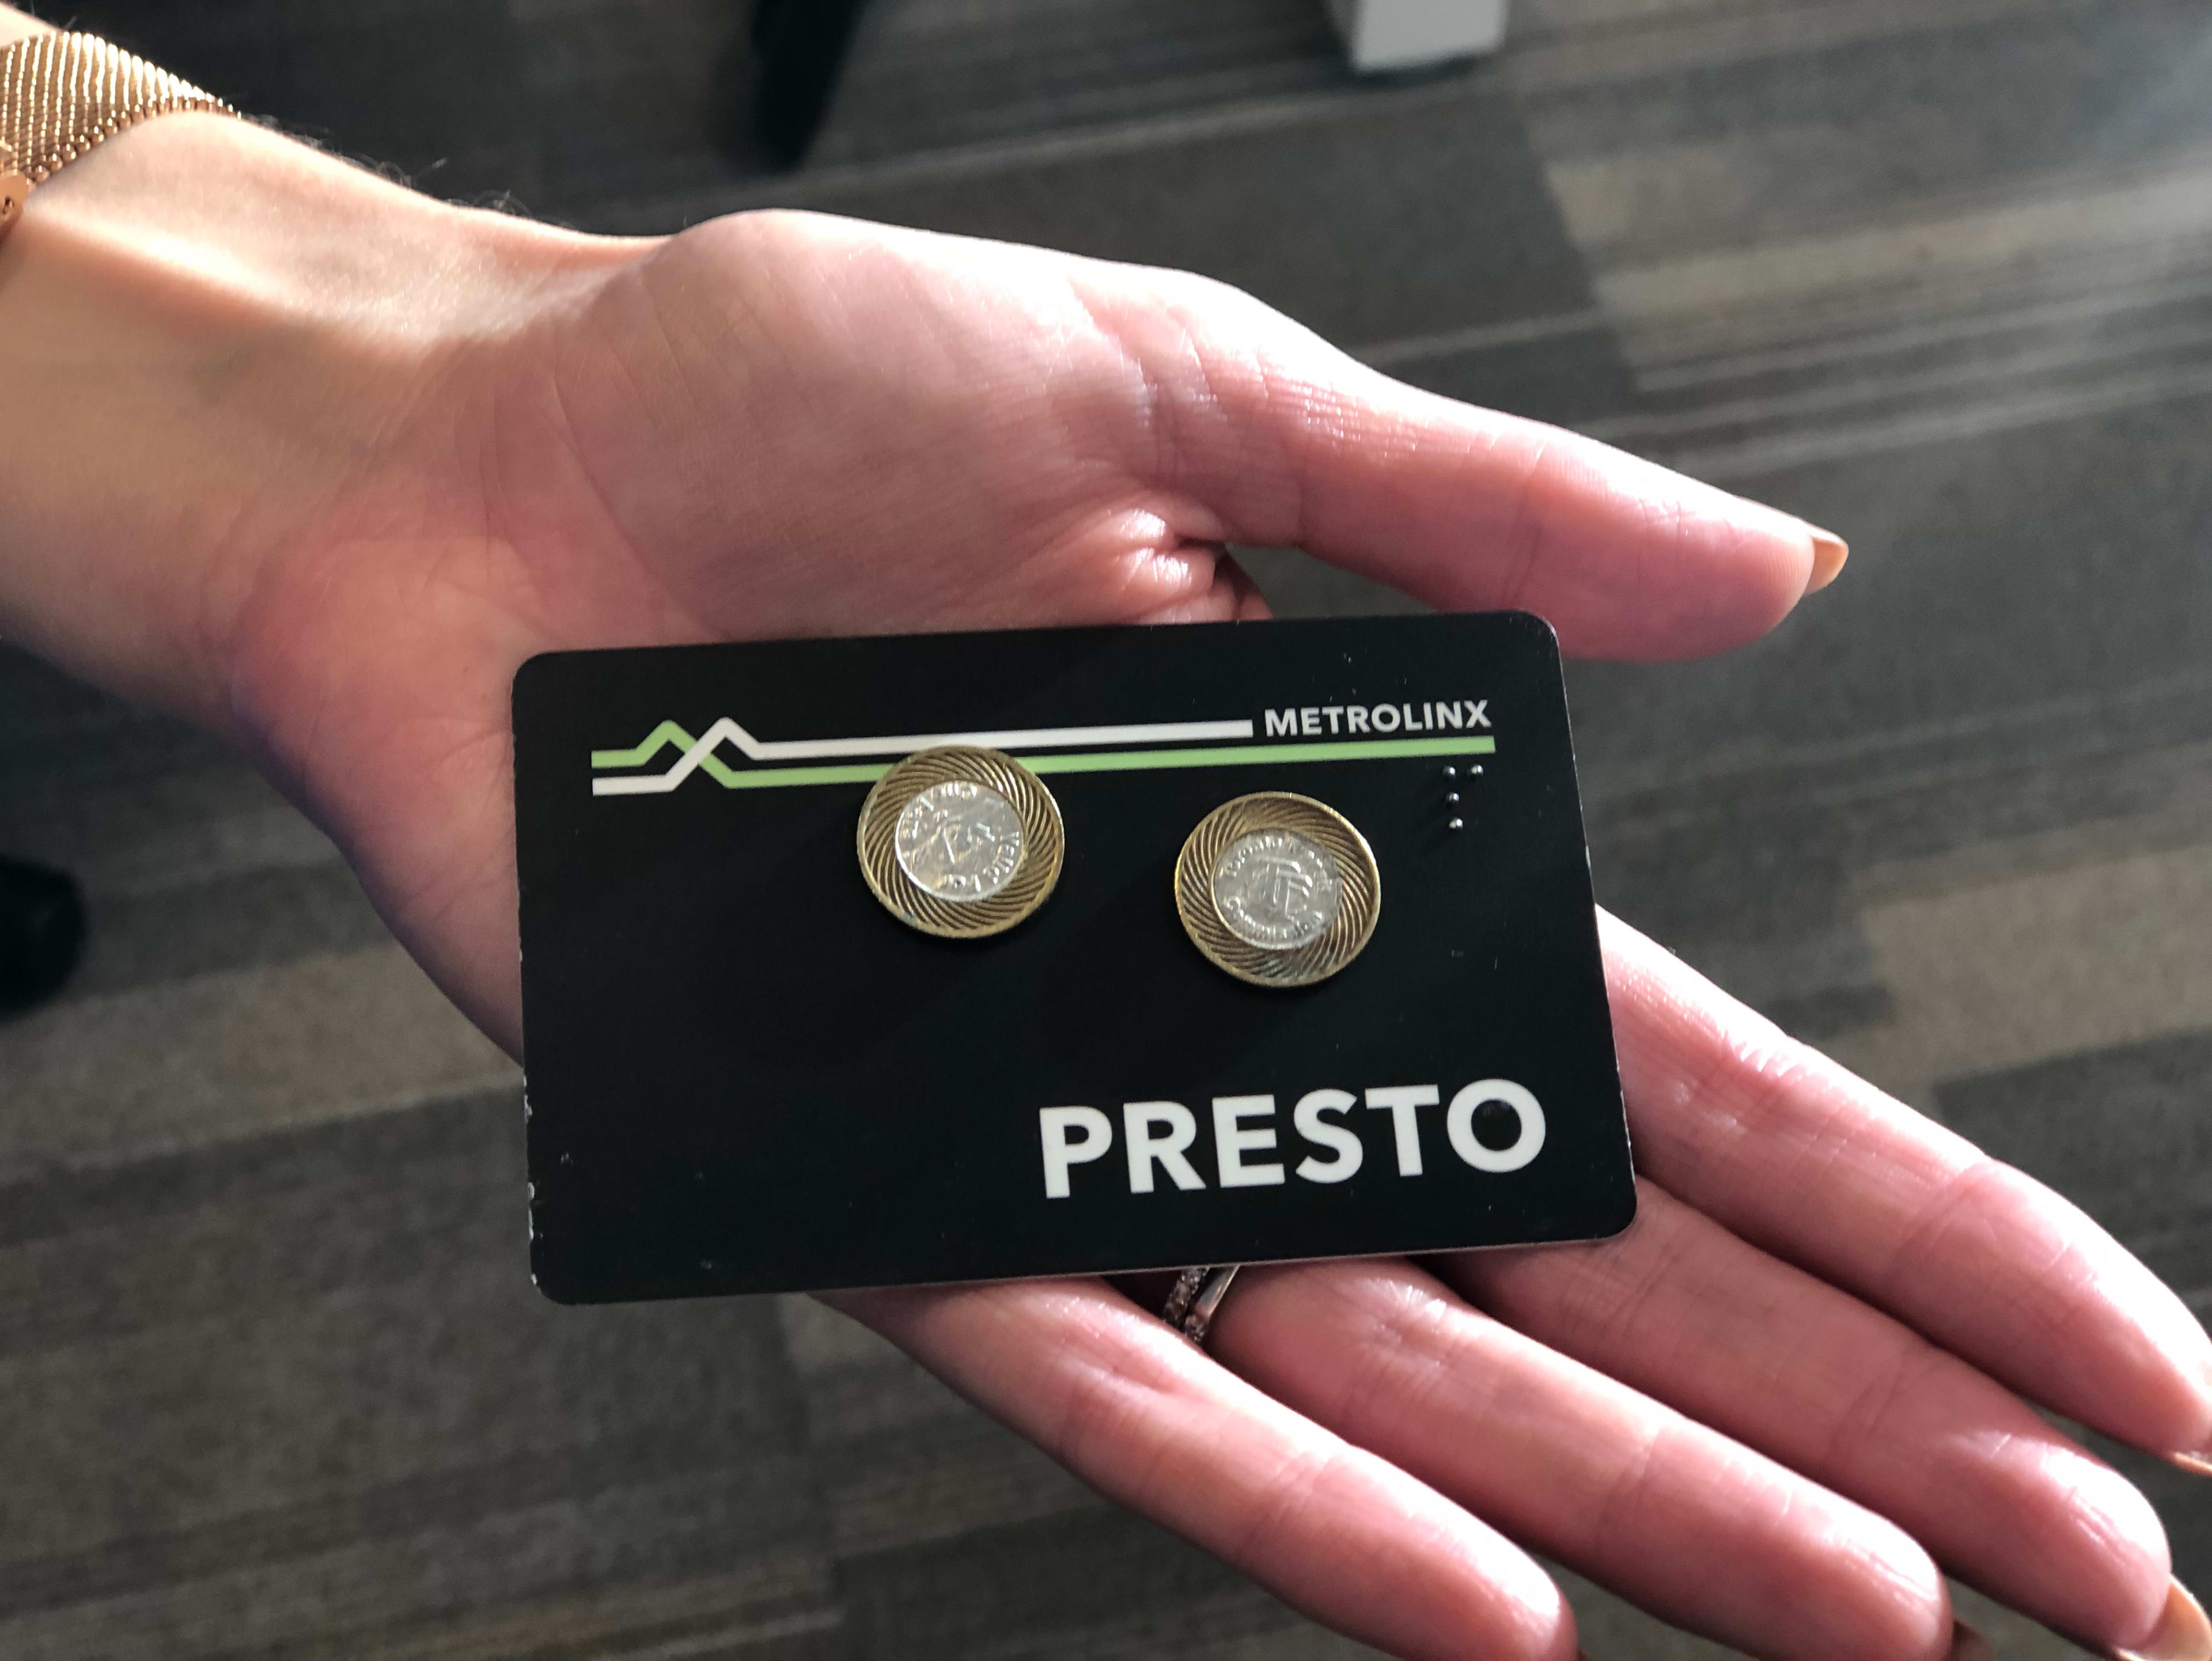 A PRESTO card and TTC tokens on a person's hand.